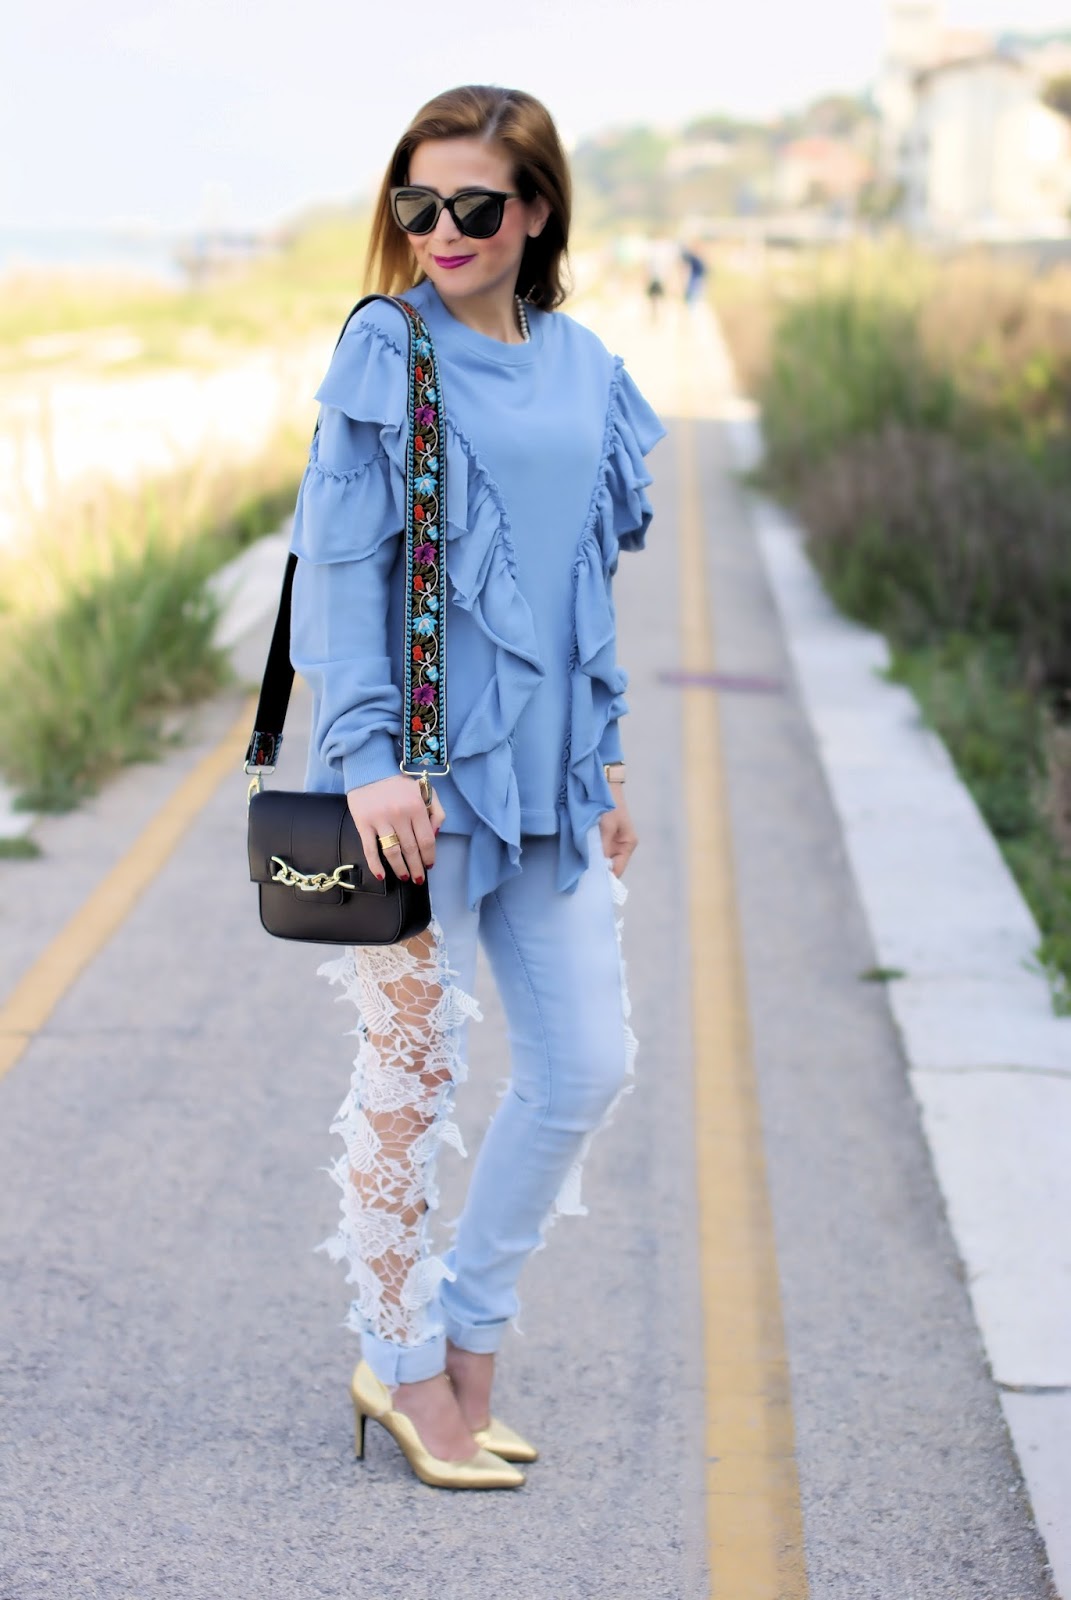 Lace cut out jeans found on Sammydress and ruffled sweatshirt for a daytime outfit idea on Fashion and Cookies fashion blog, fashion blogger style